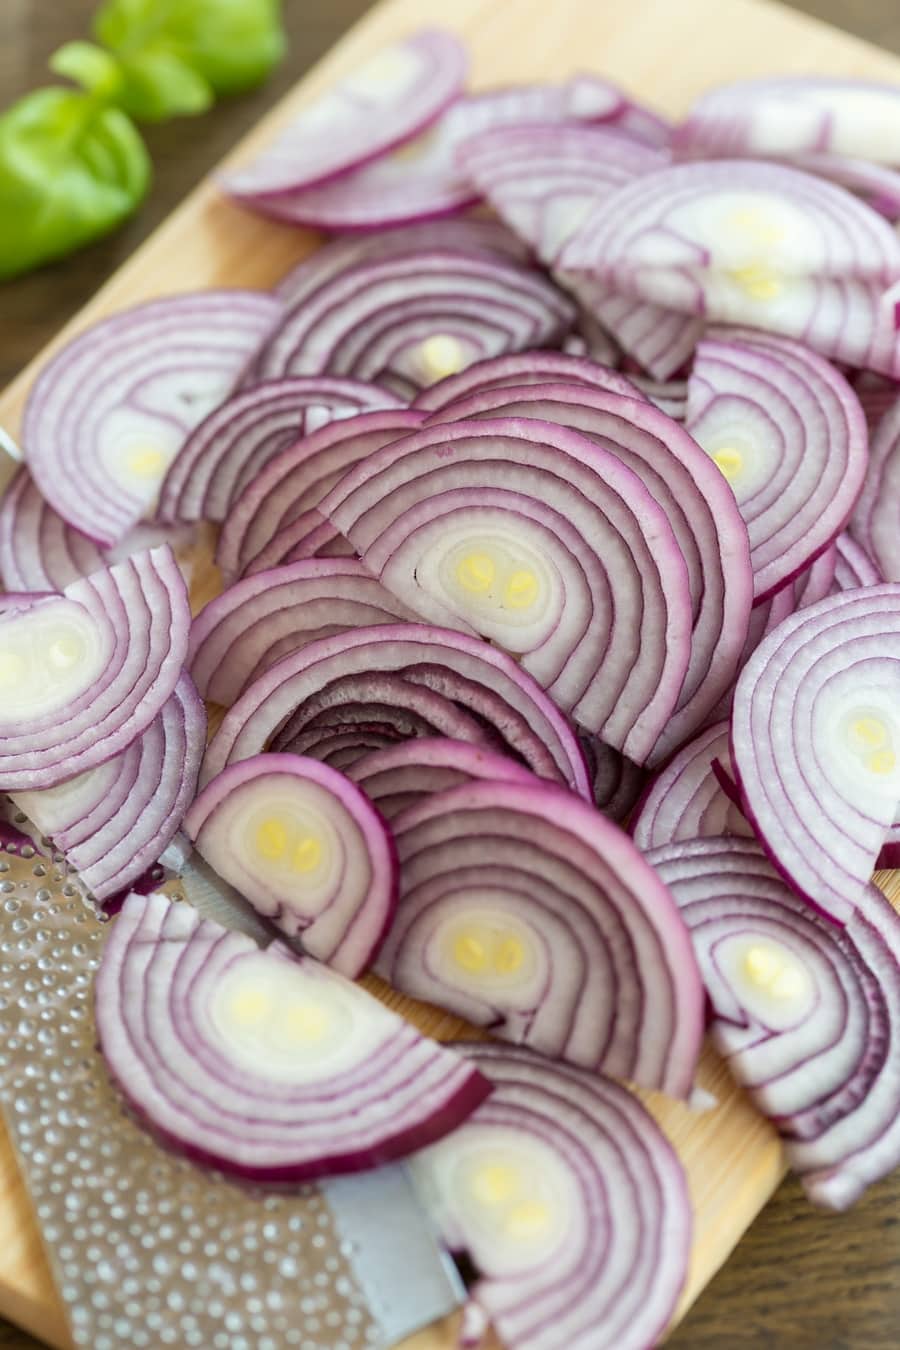 Sliced red onions on a wooden cutting board.